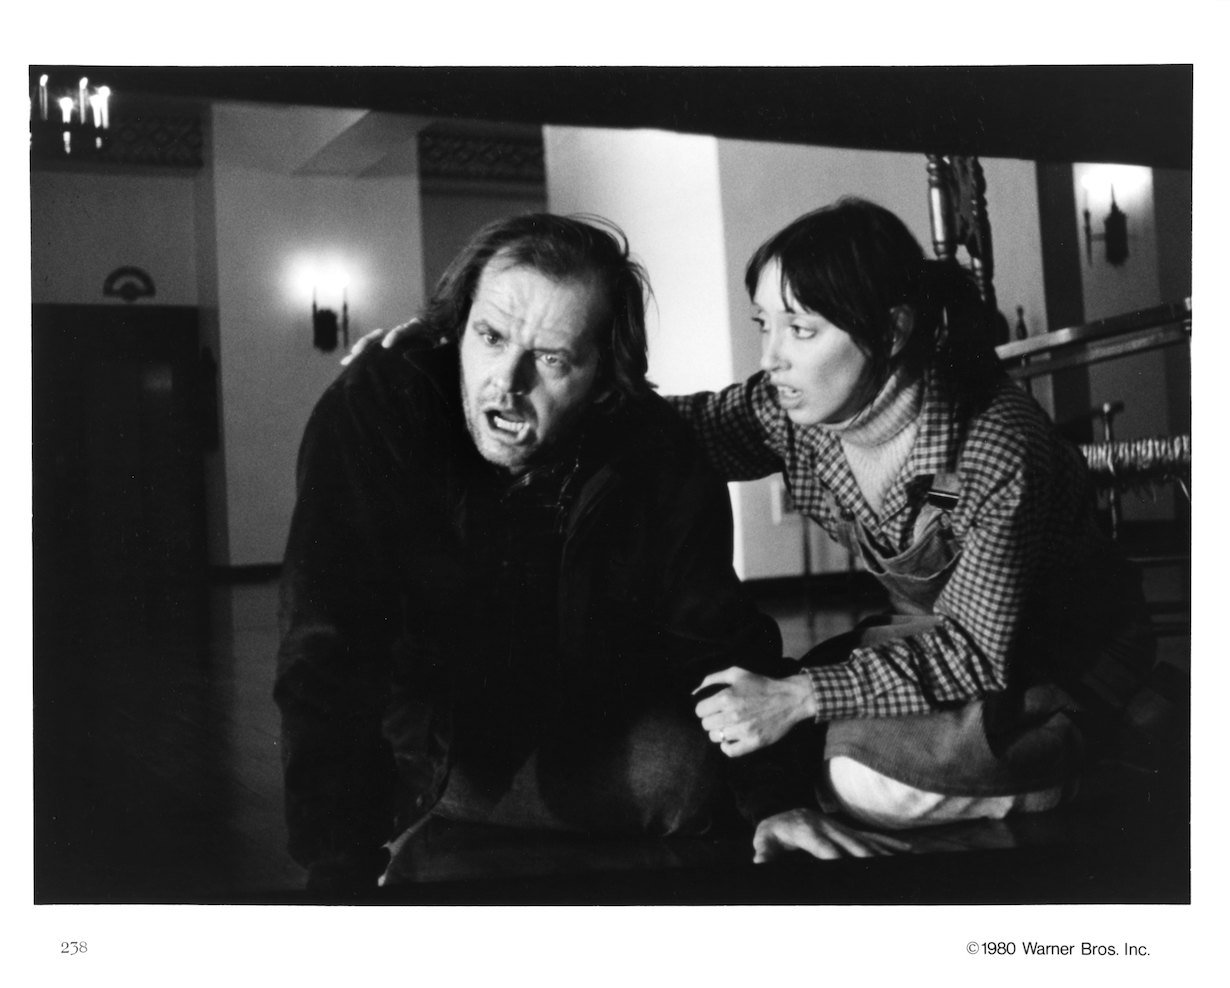 Actors Jack Nicholson and Shelley Duvall in a scene from the movie 'The Shining'